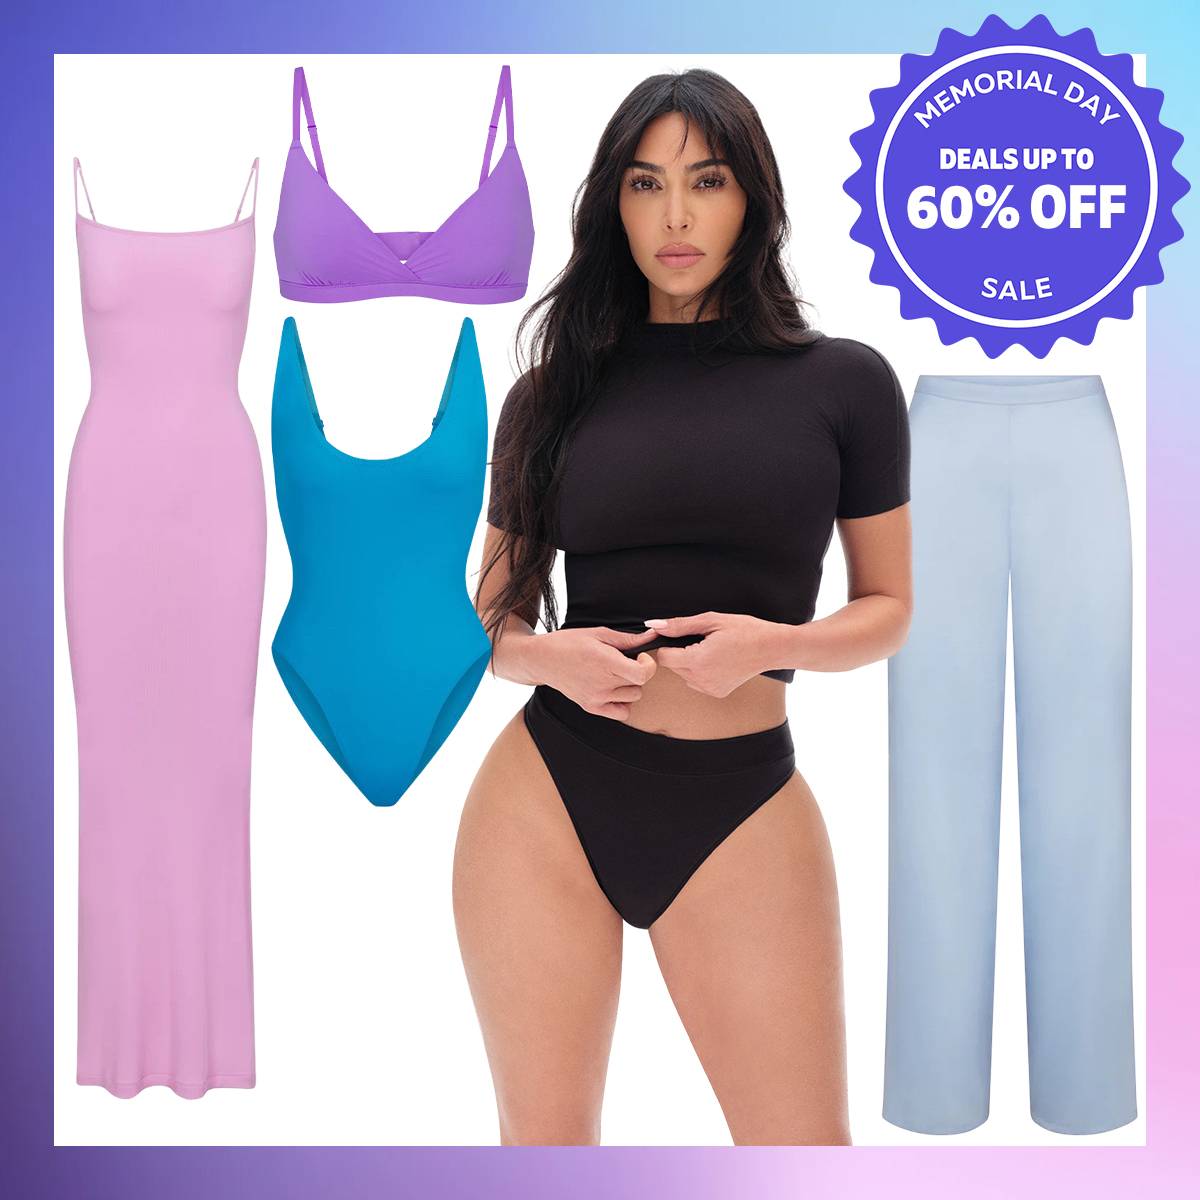 Kim Kardashian's SKIMS launches Bi-Annual Sale just in time for